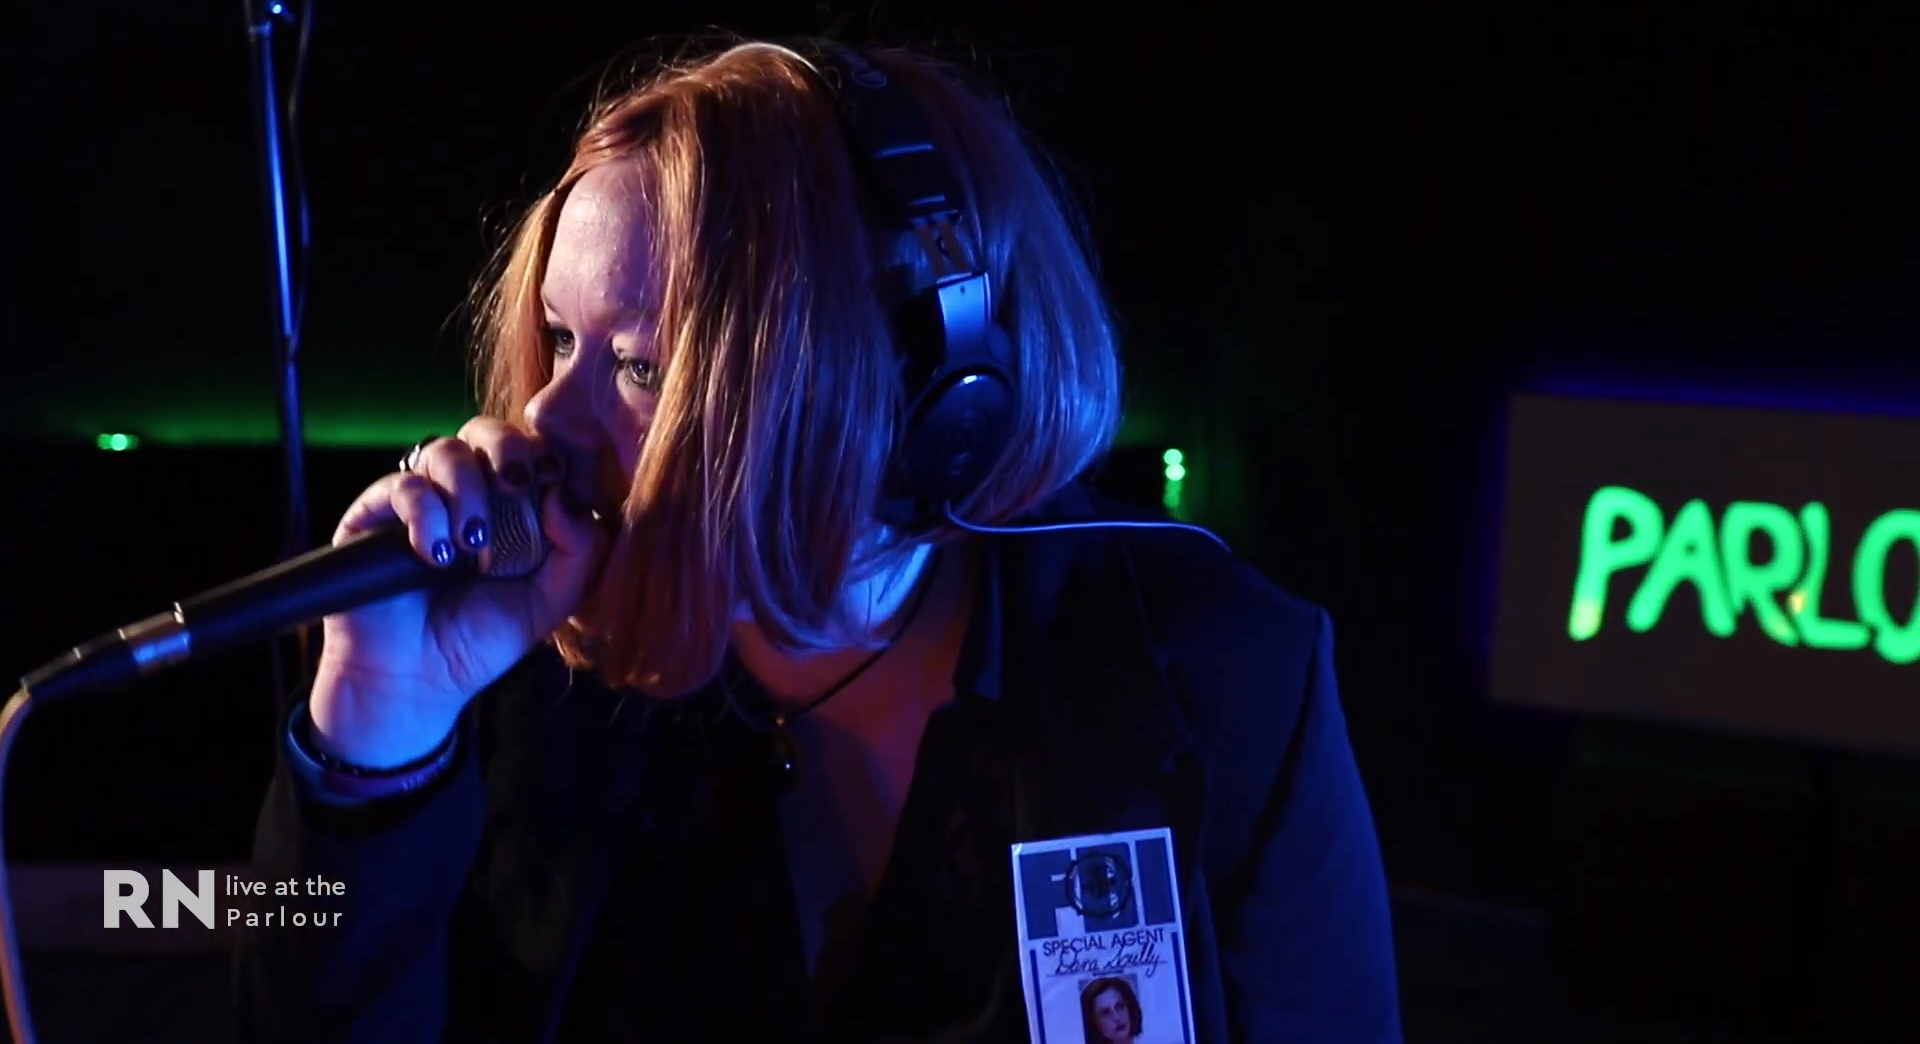 X-Files meets hardcore punk in this gnarly live session (video)